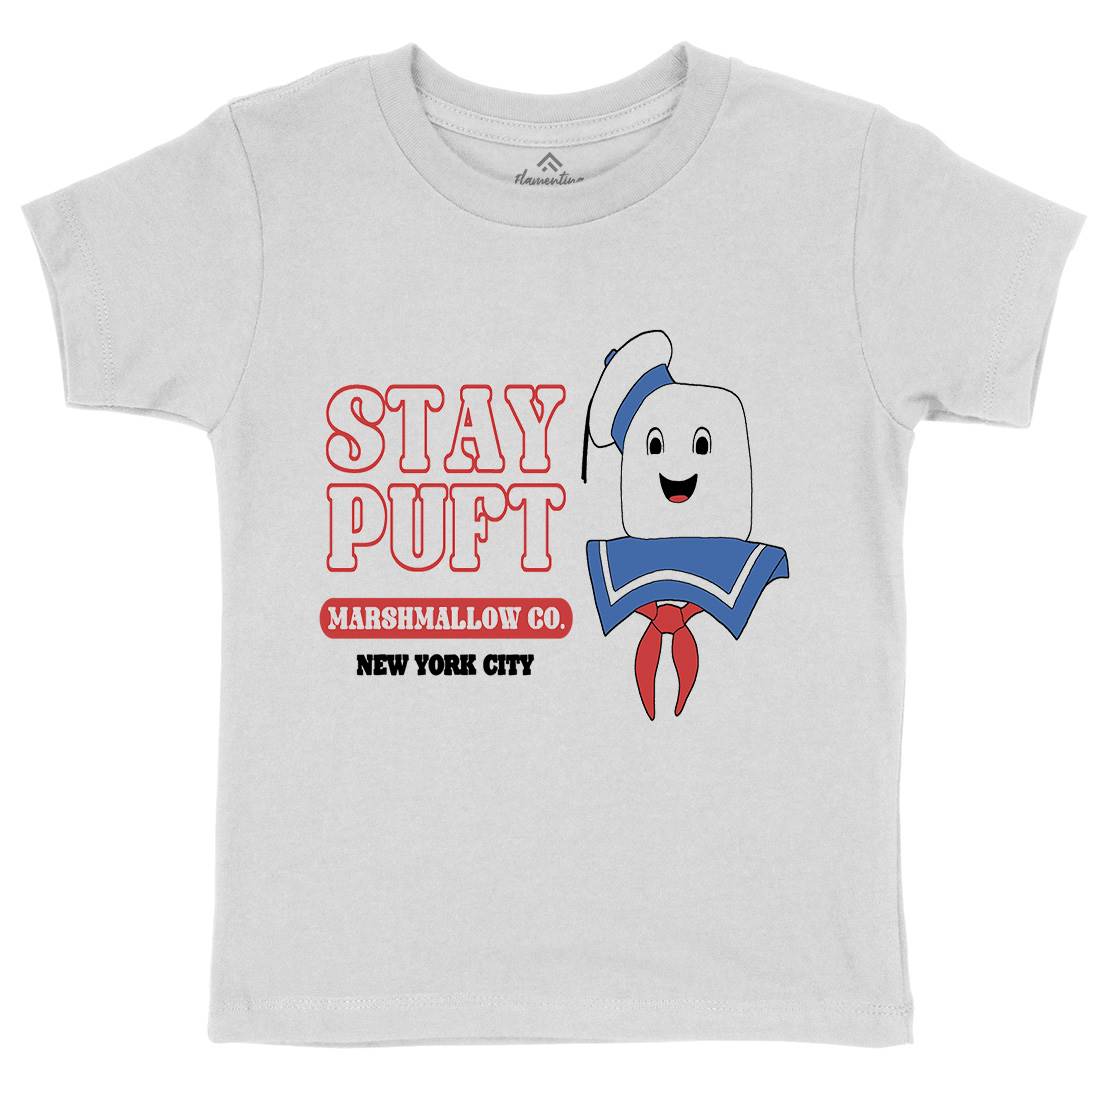 Stay Puft Co Kids Crew Neck T-Shirt Space D141